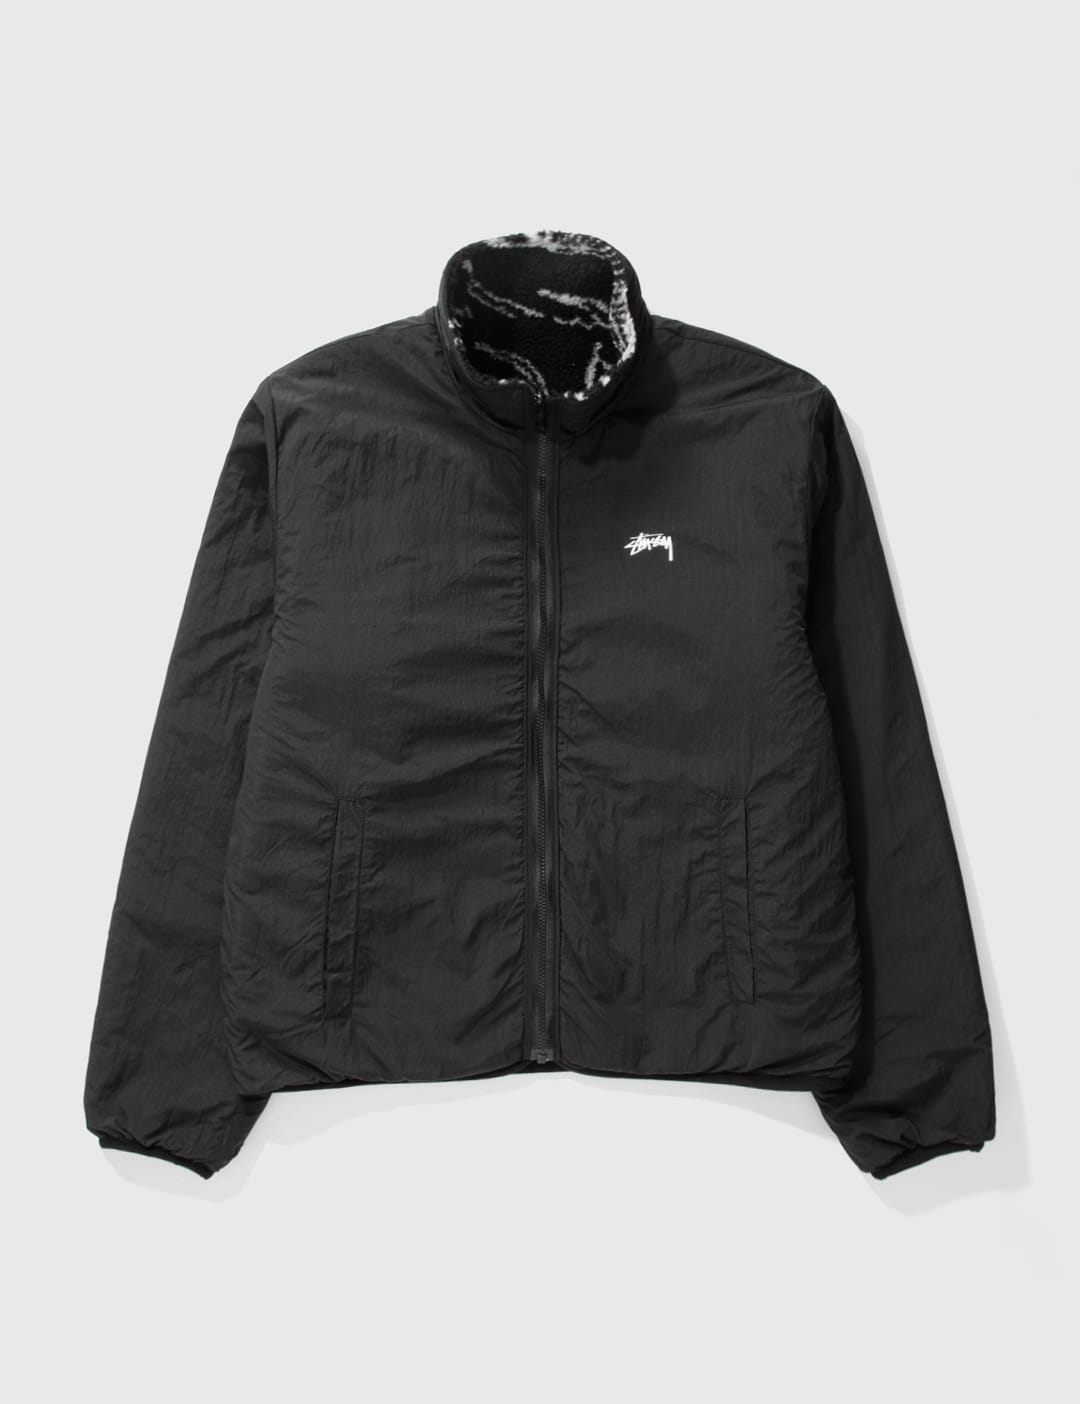 Stüssy - Dragon Sherpa Jacket | HBX - Globally Curated Fashion and 